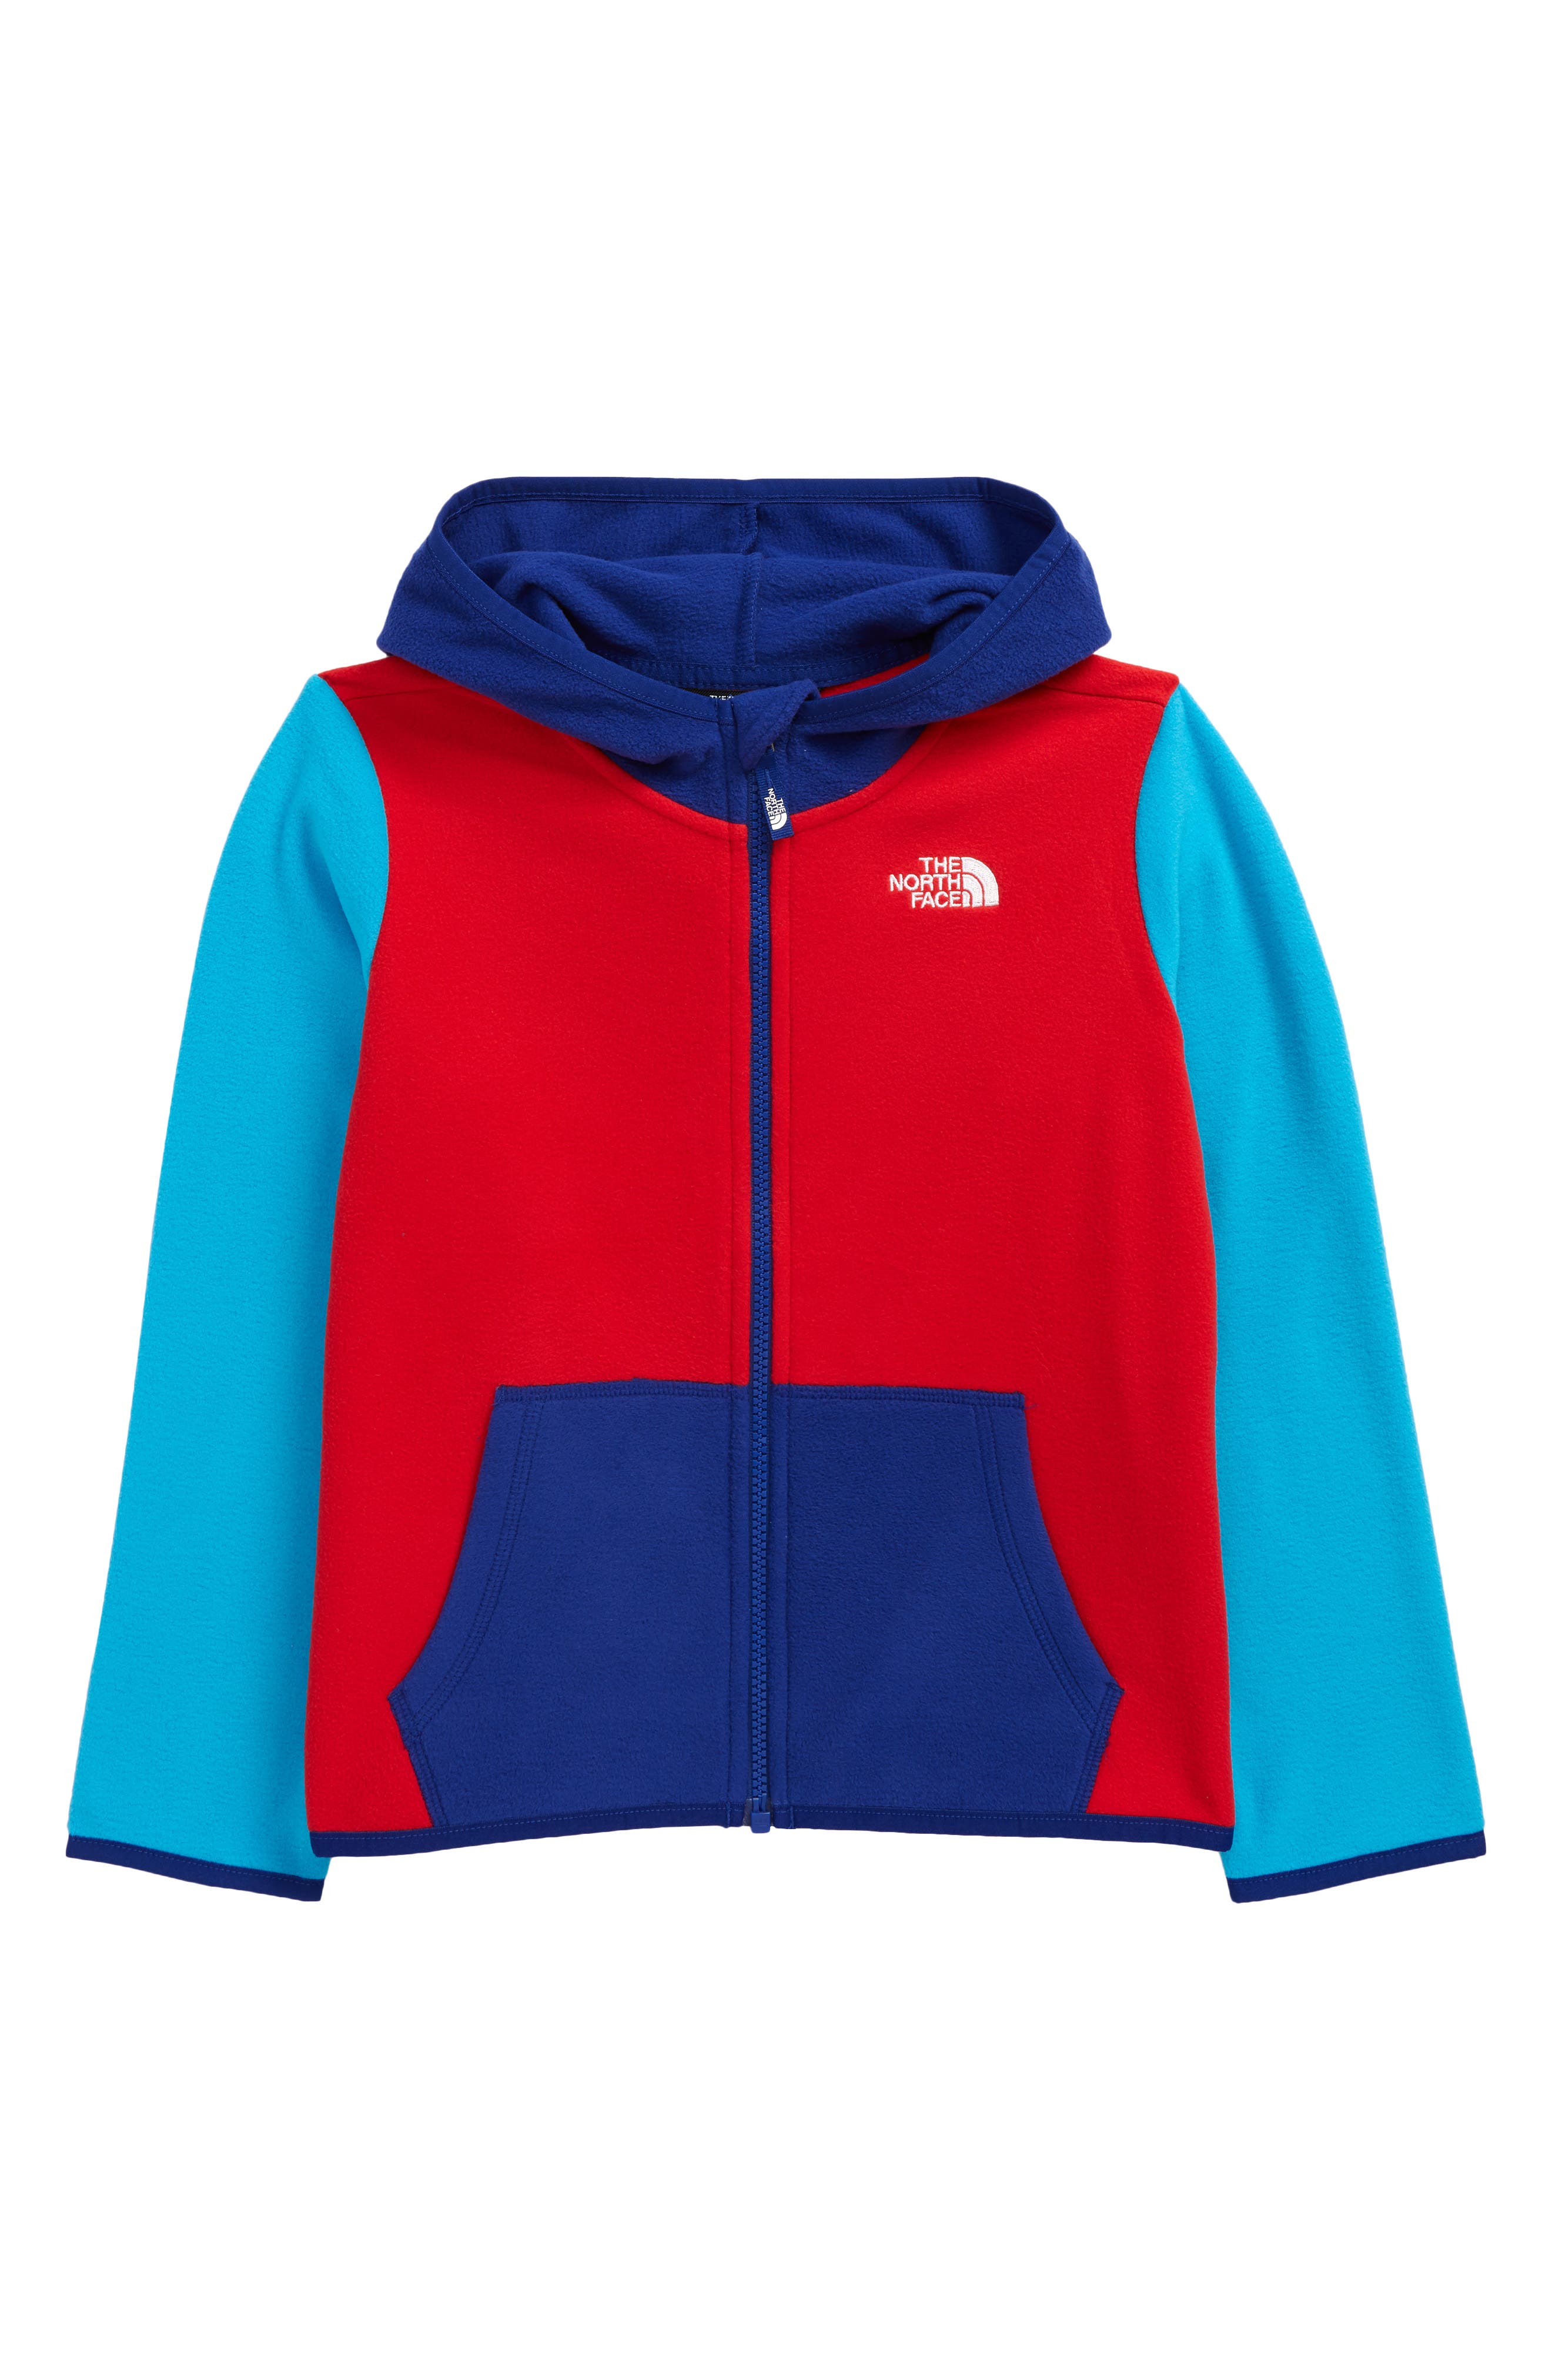 north face jacket for 2 year old